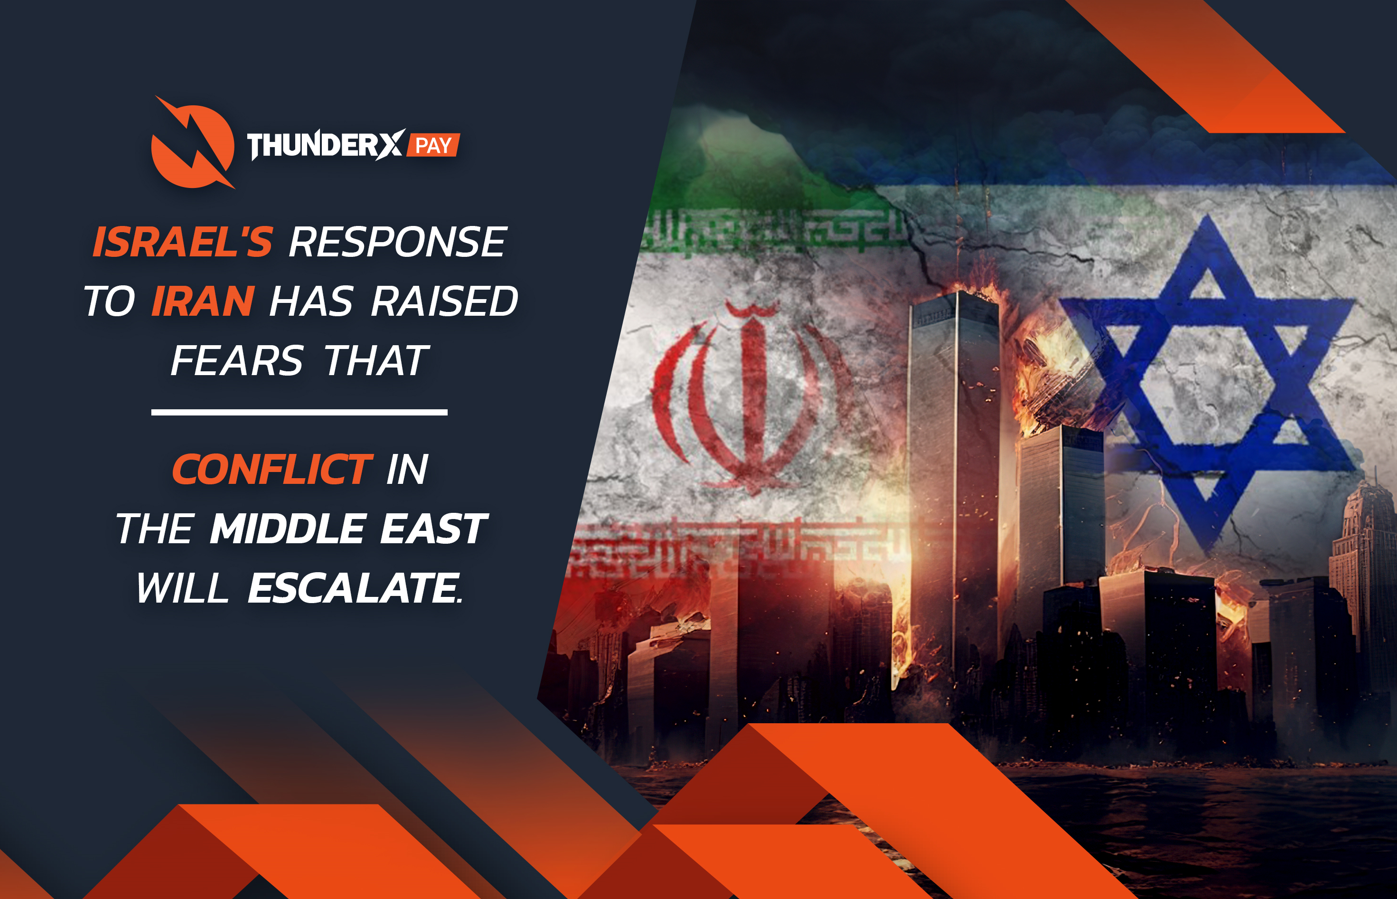 Israel Response to Iran has raised, fears that conflict in the Middle East will escalate.